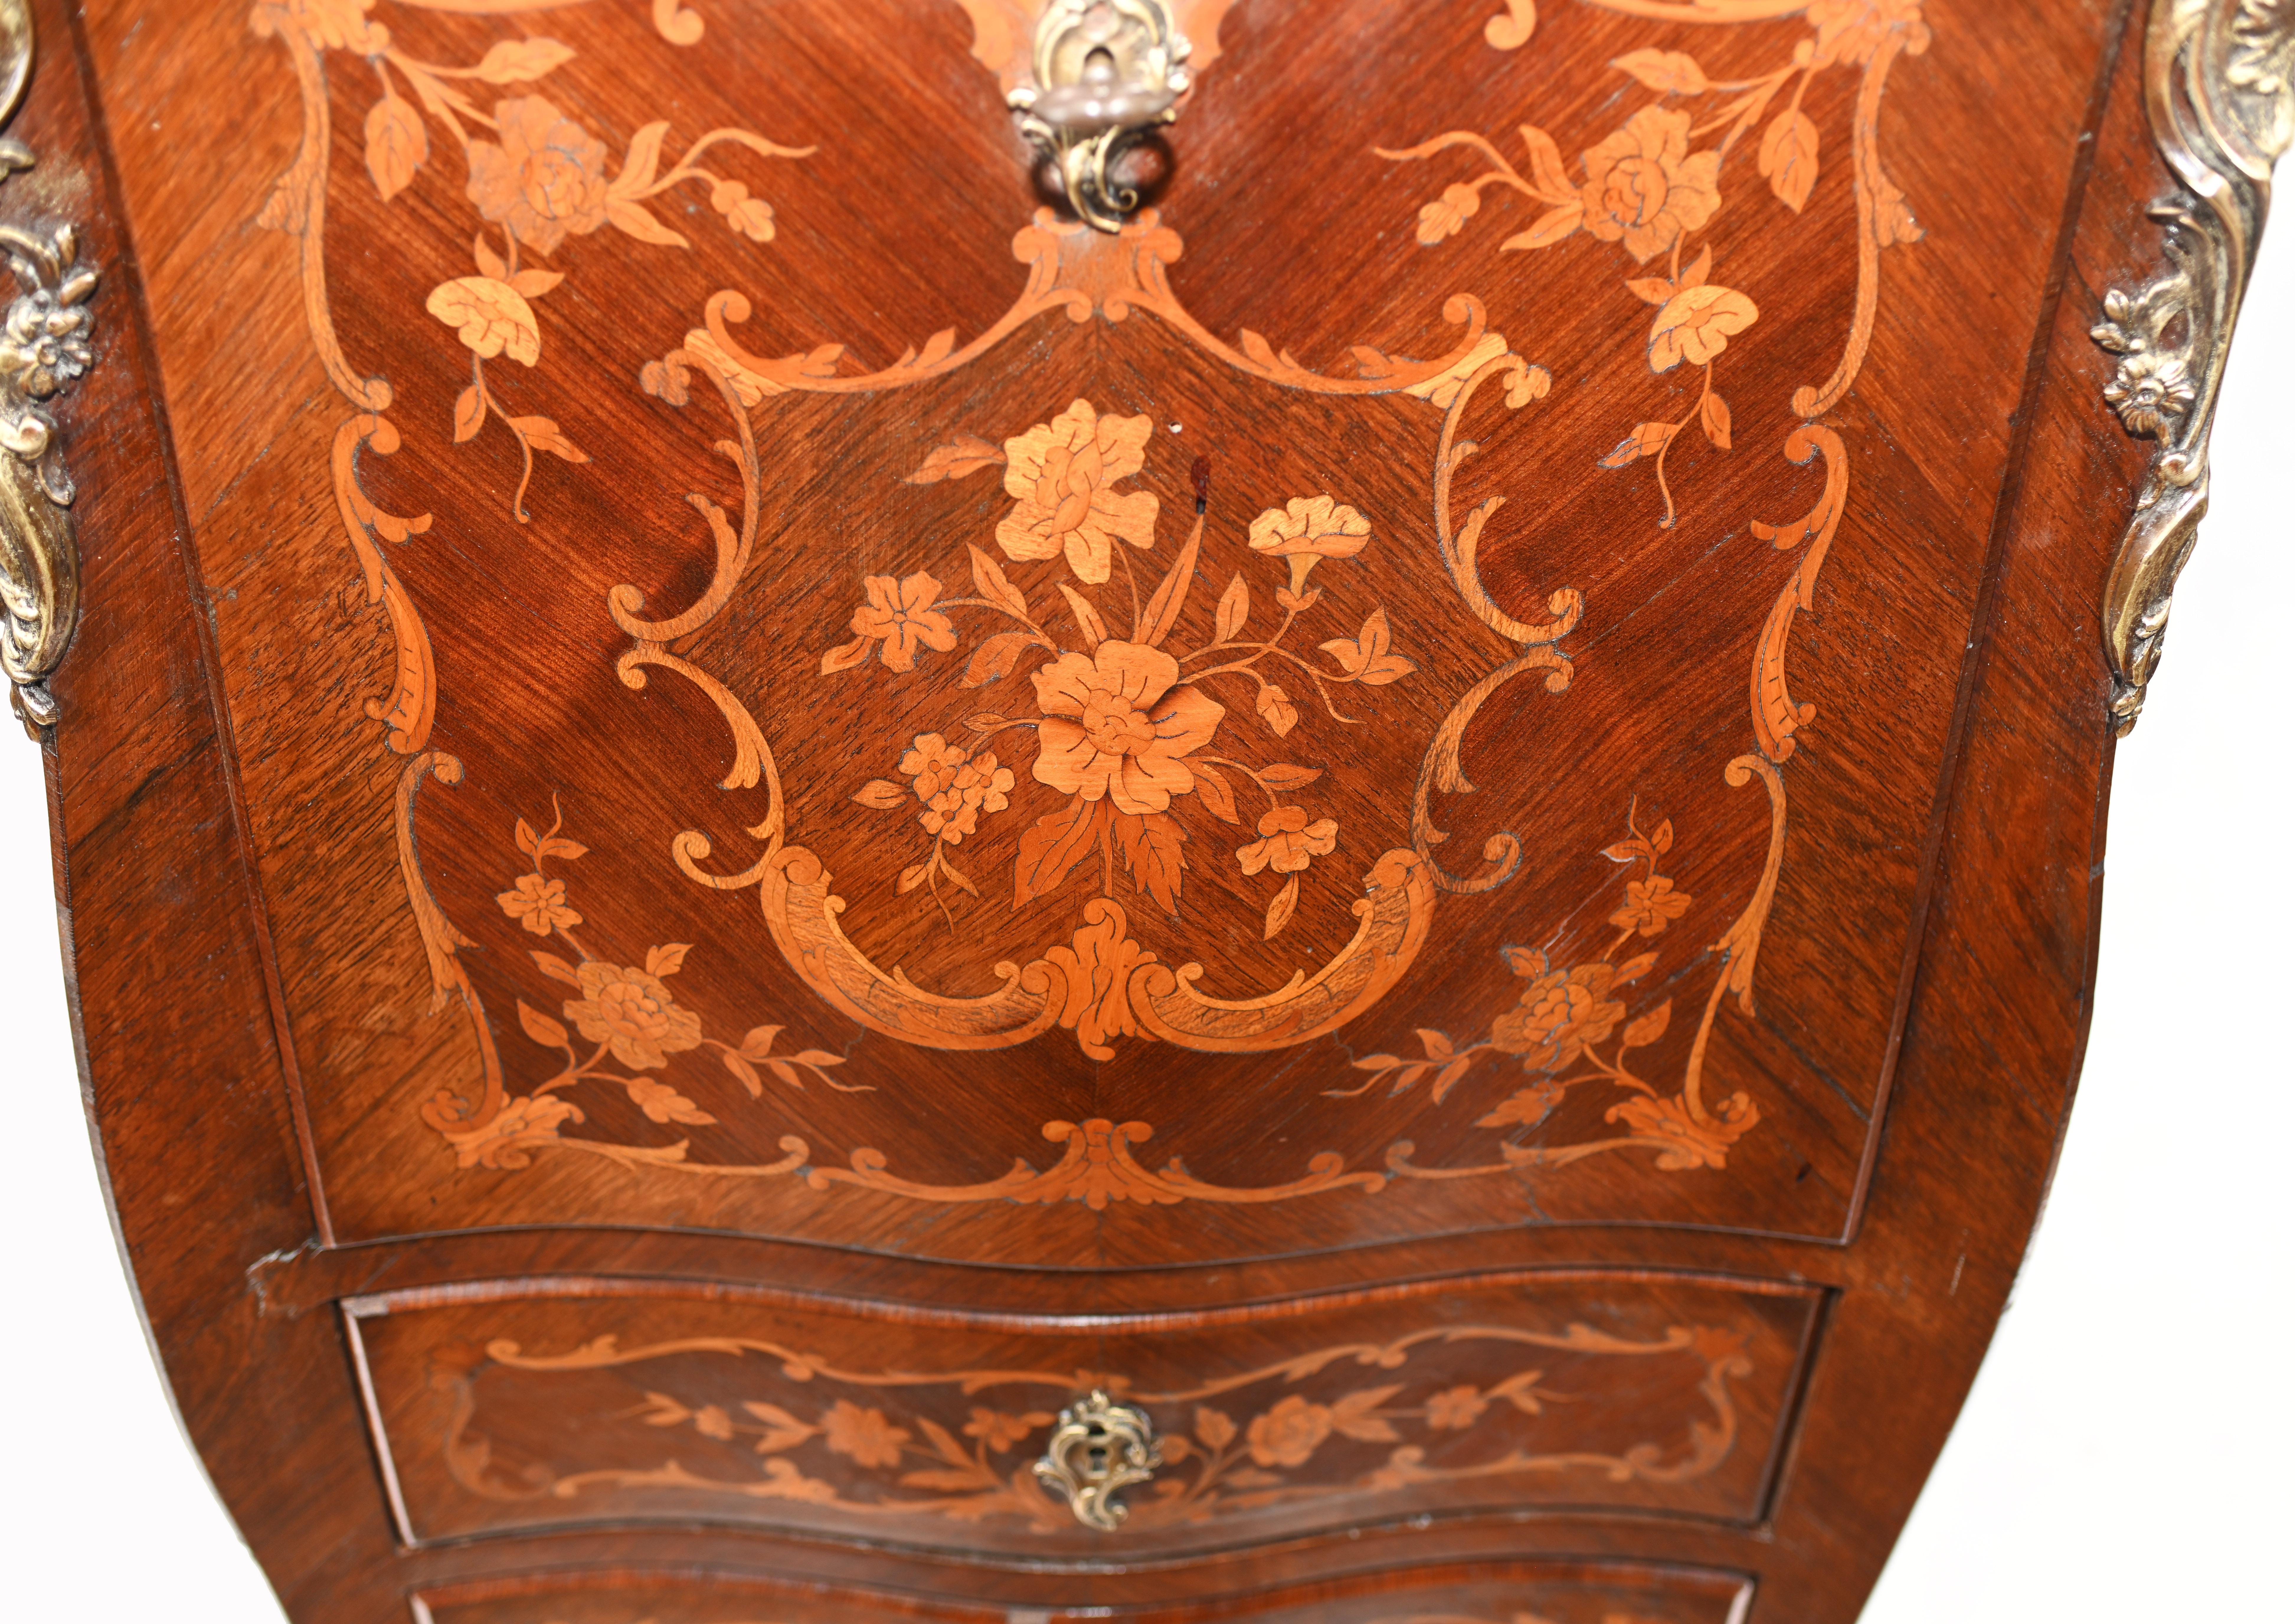 Gorgeous French Empire escritoire desk with intricate floral inlay
Classic piece of space saving French furniture
Desk writing surface opens out to reveal leather topped writig surface and various cubby holes
Intricate floral marquetry inlay on all